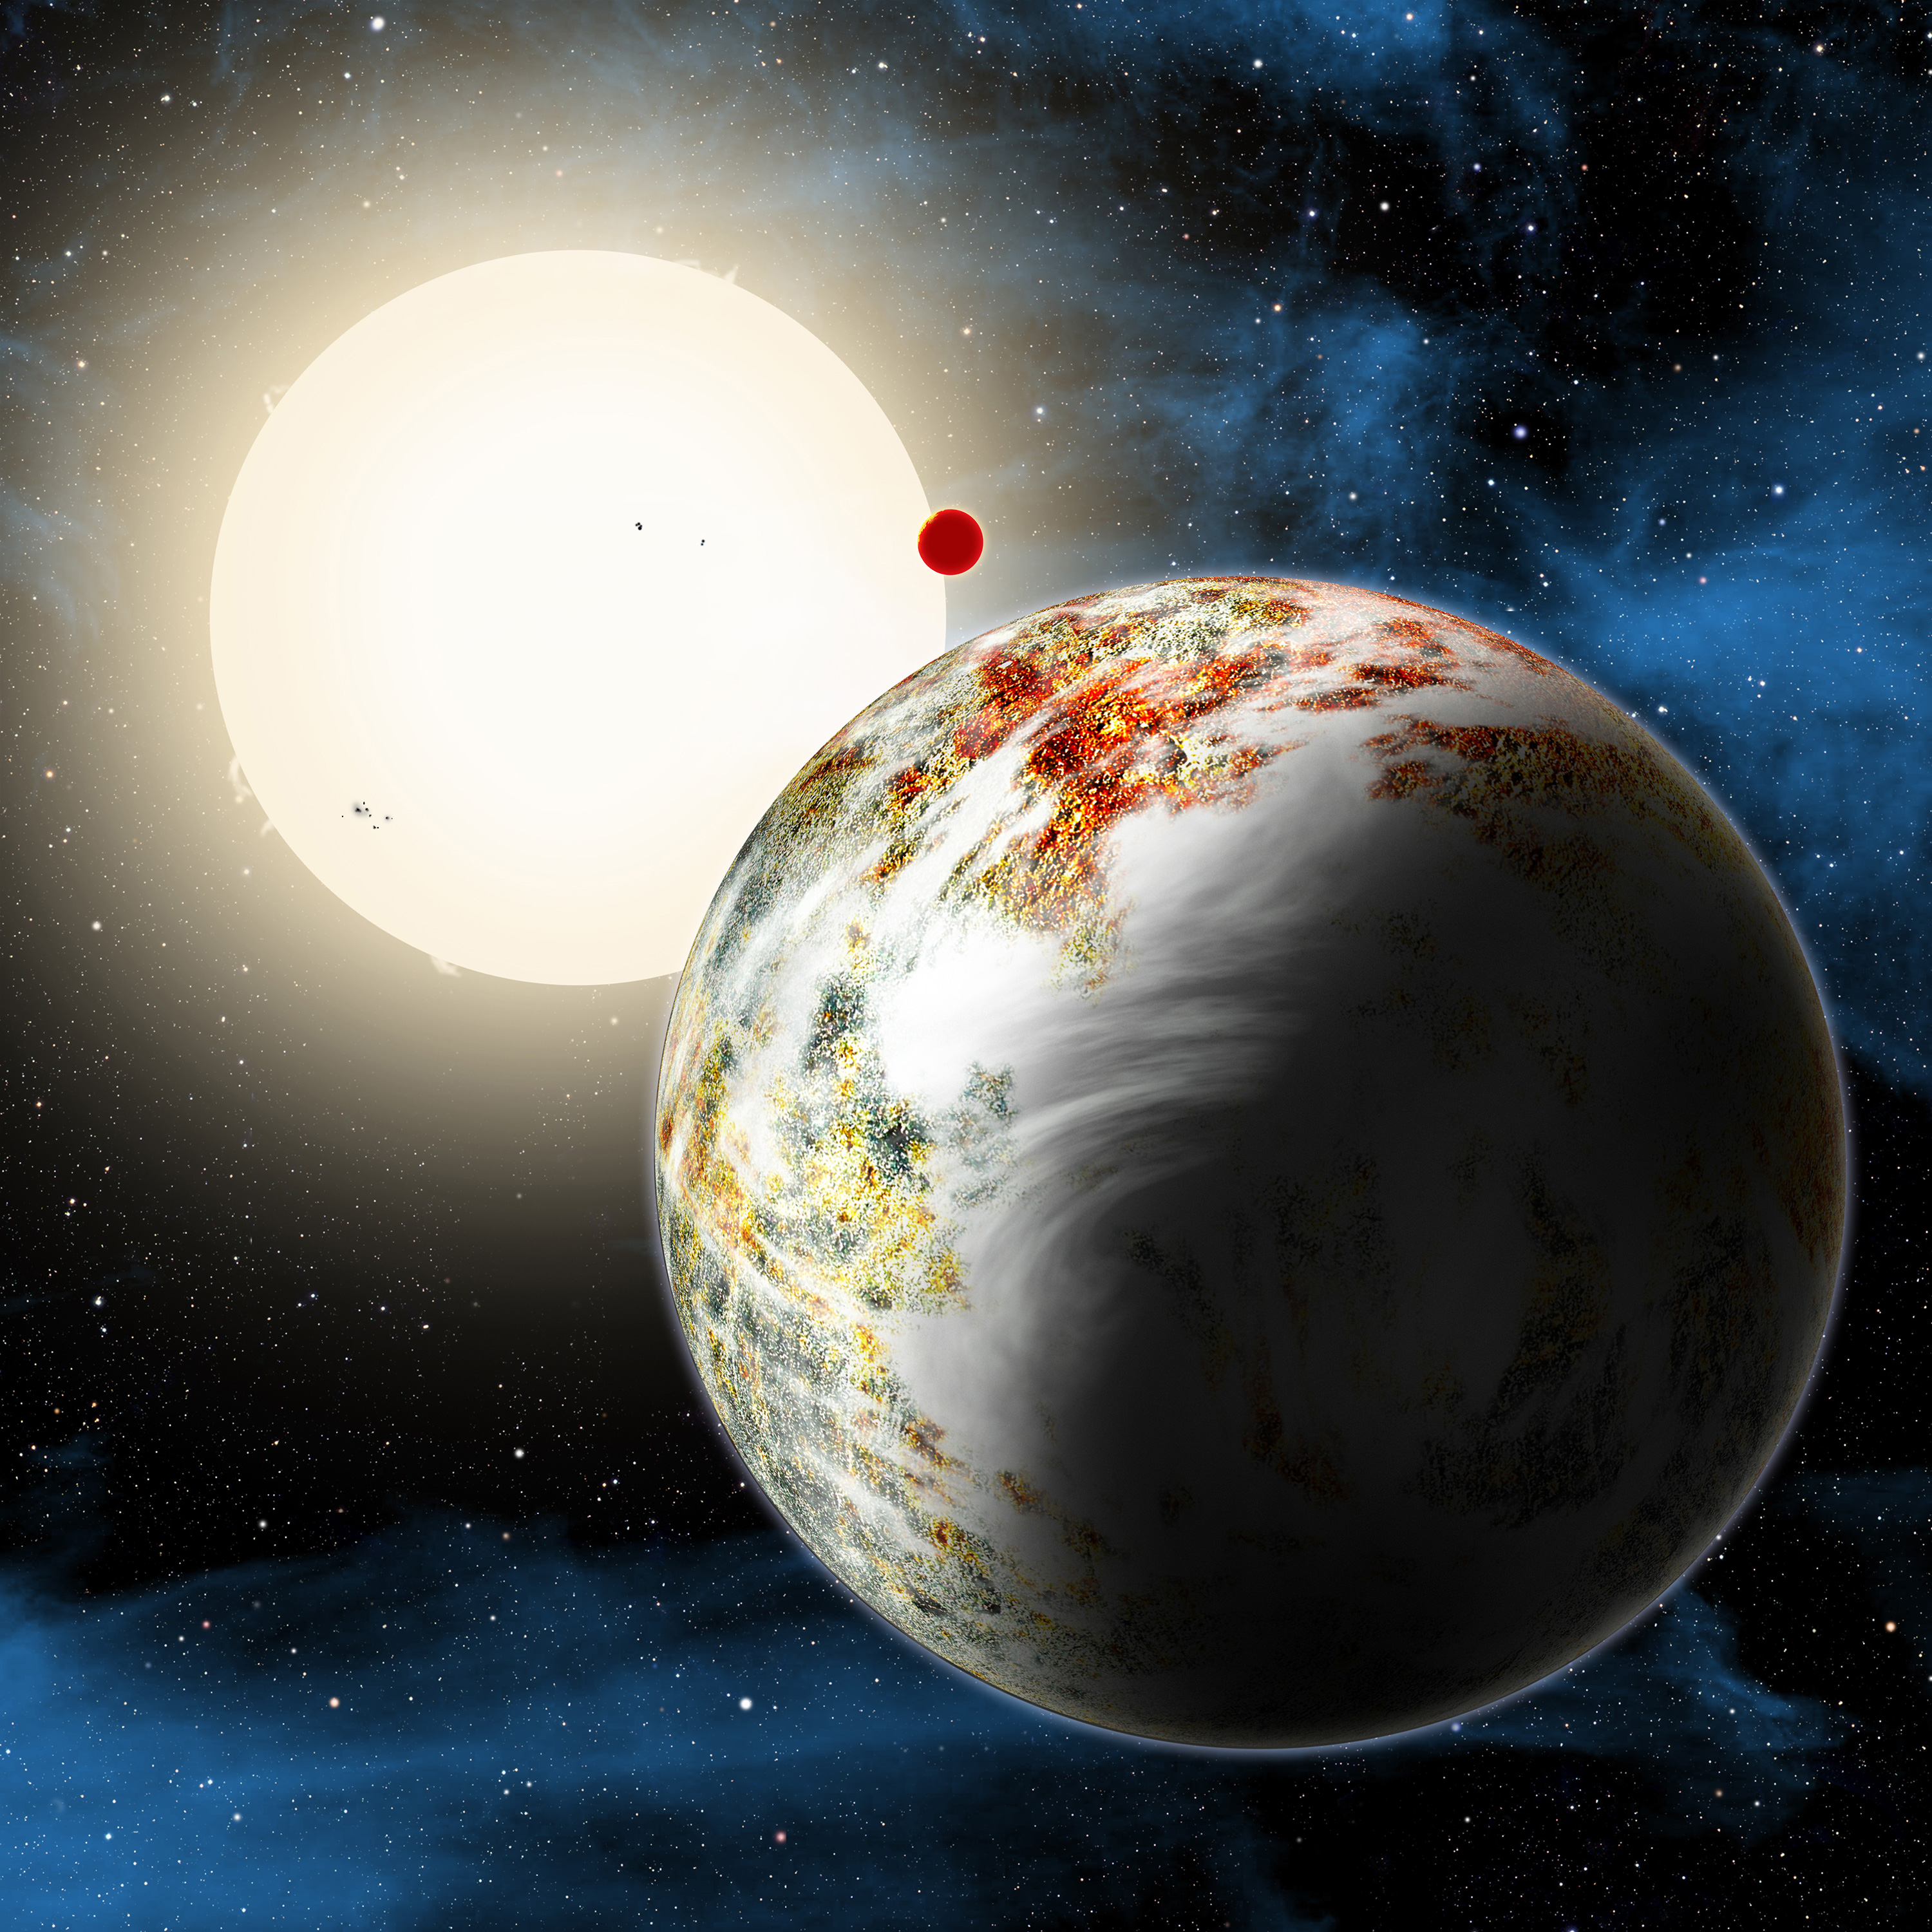 The newly discovered "mega-Earth" Kepler-10c dominates the foreground in this artist's conception. Its sibling, the lava world Kepler-10b, is in the background. Both orbit a sunlike star. Kepler-10c has a diameter of about 18,000 miles, 2.3 times as large as Earth, and weighs 17 times as much. Therefore it is all solids, although it may possess a thin atmosphere shown here as wispy clouds. Credit: David A. Aguilar/Harvard-Smithsonian Center for Astrophysics (CfA)